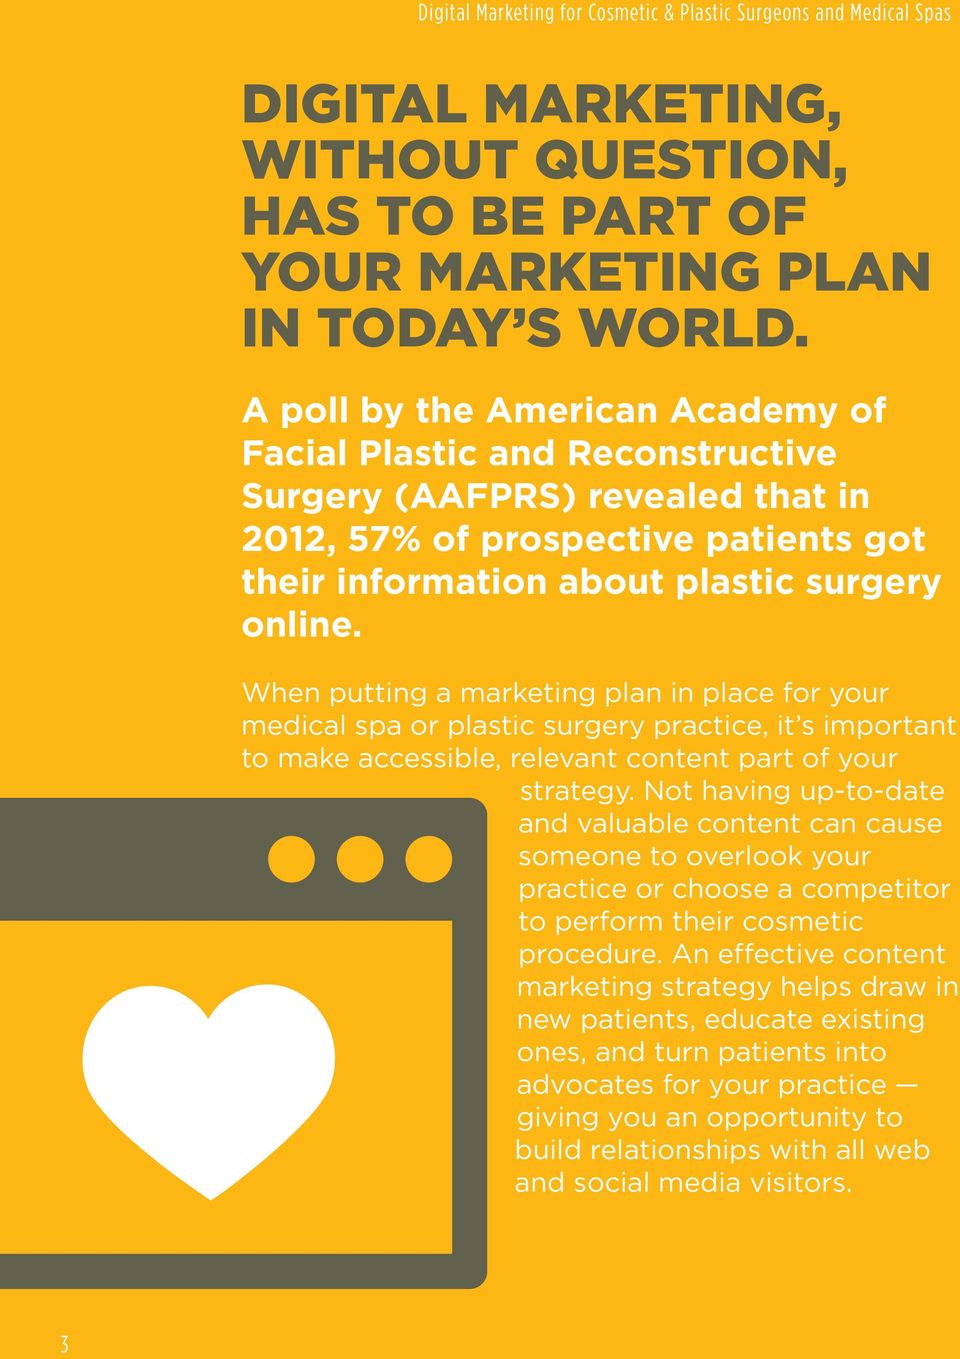 When putting a marketing plan in place for your medical spa or plastic surgery practice, it s important to make accessible, relevant content part of your strategy.